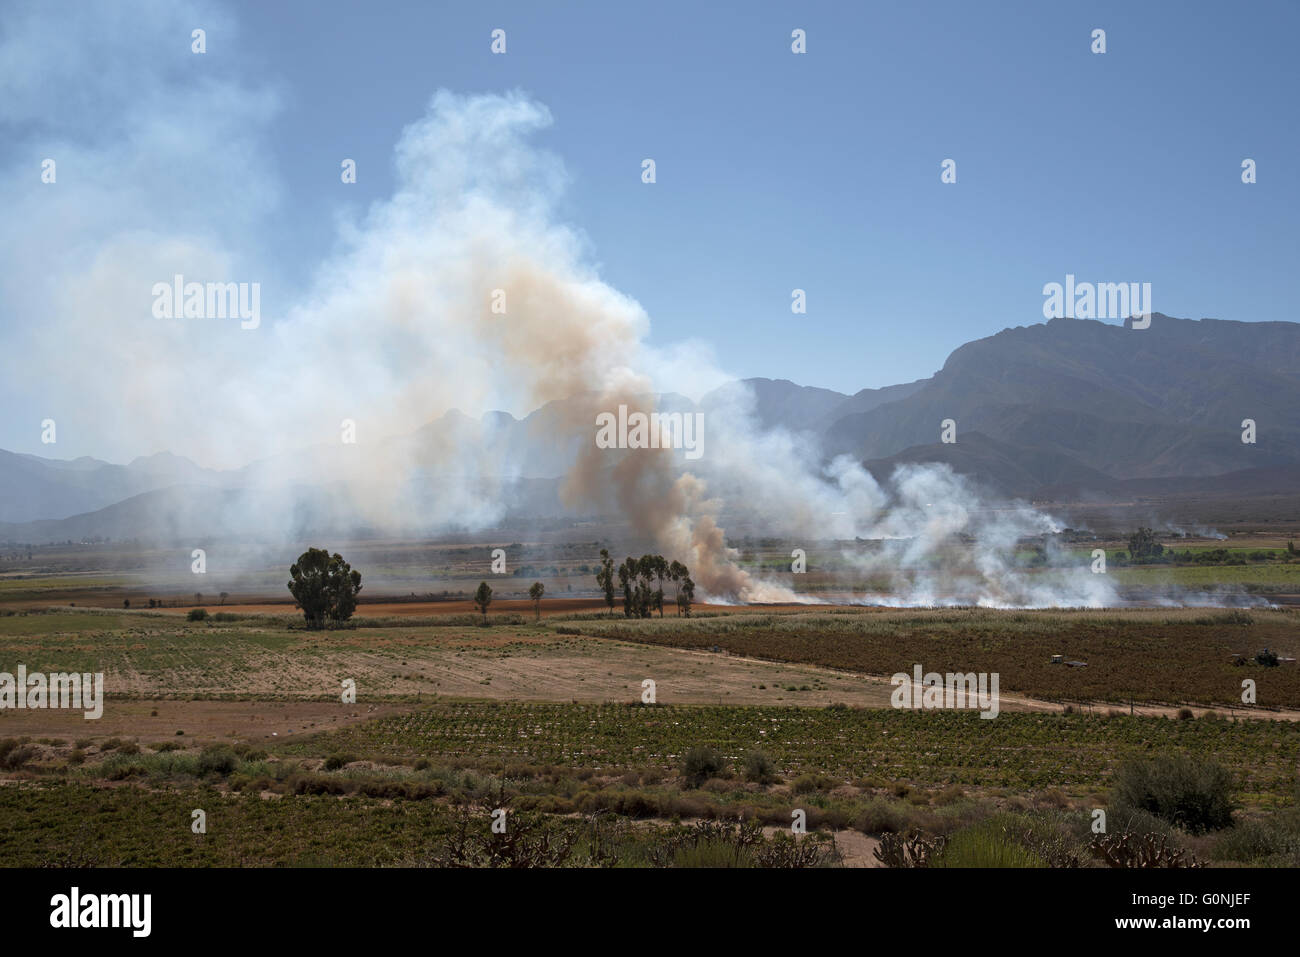 Smoke from a fire burning off a farmers field in the Western Cape South Africa Stock Photo